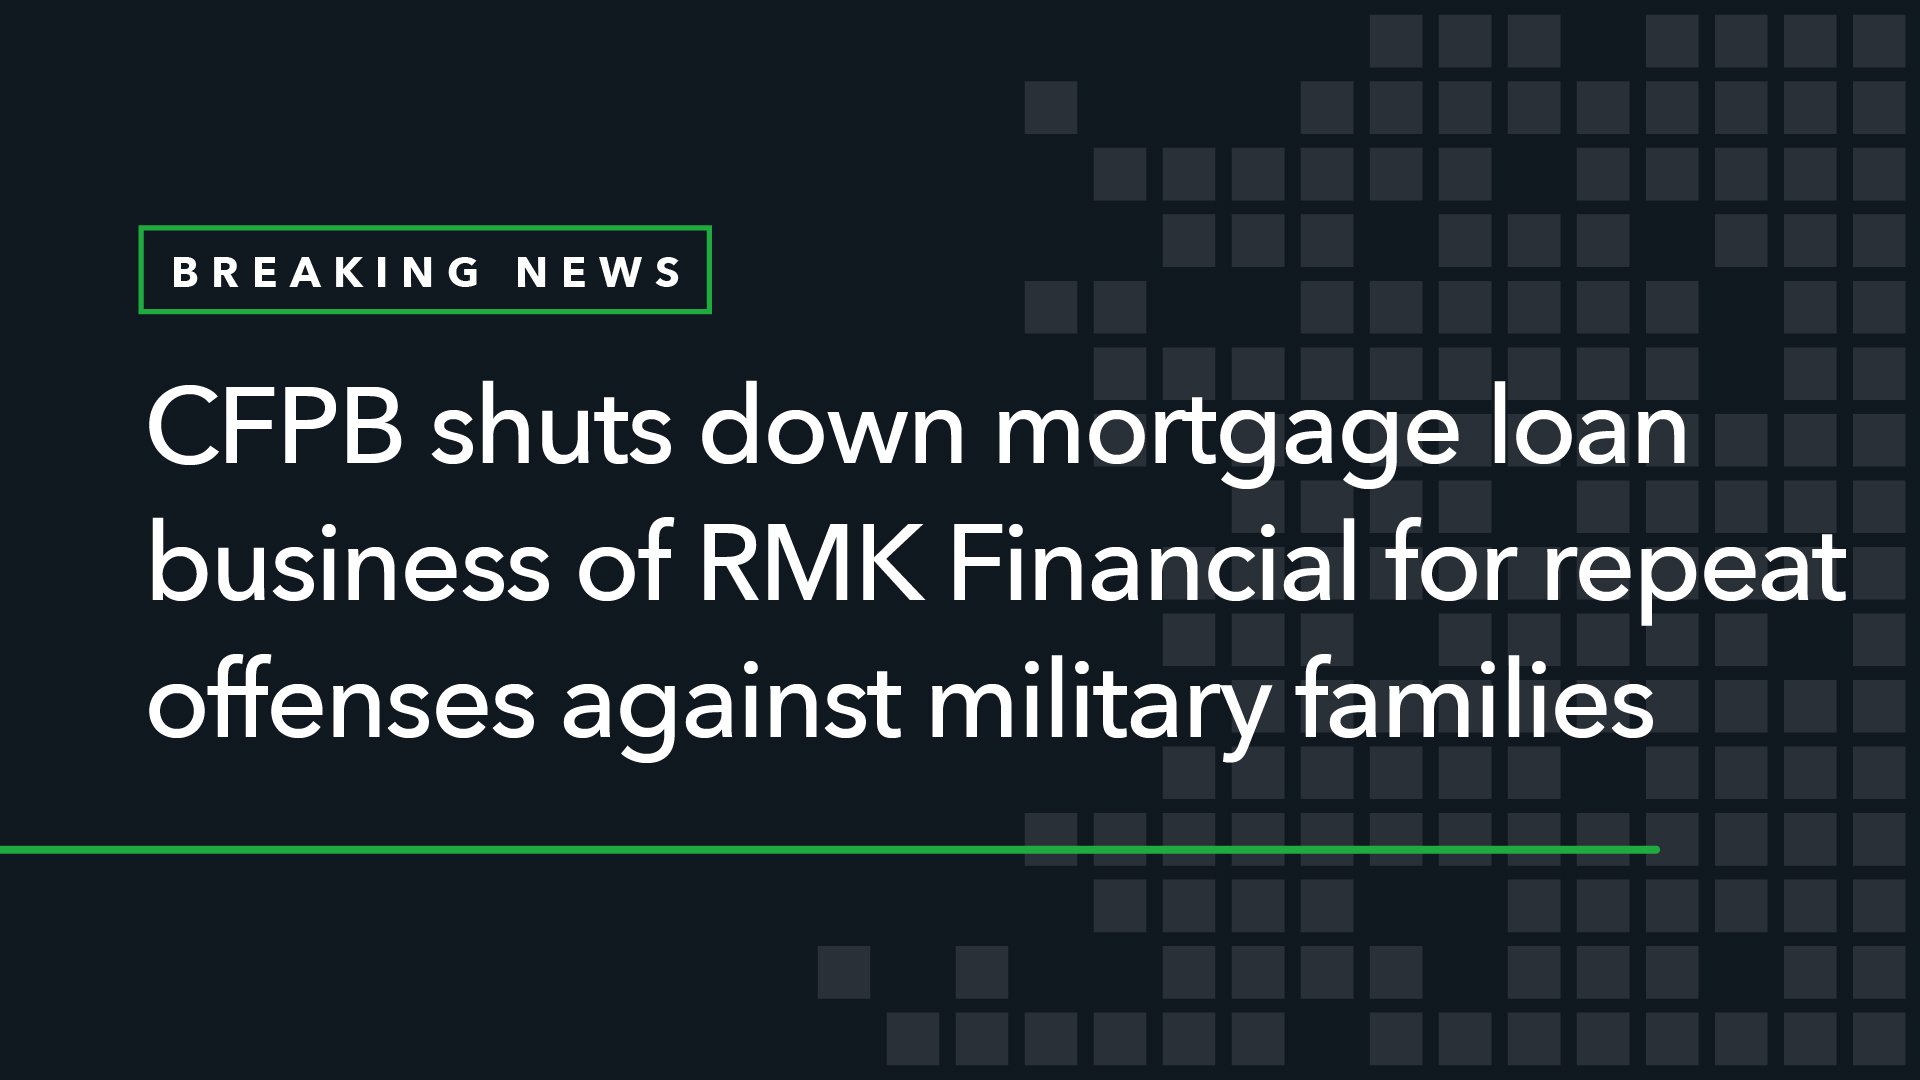 CFPB Shuts Down Mortgage Loan Business of RMK Financial for Repeat Offenses Against Military Families